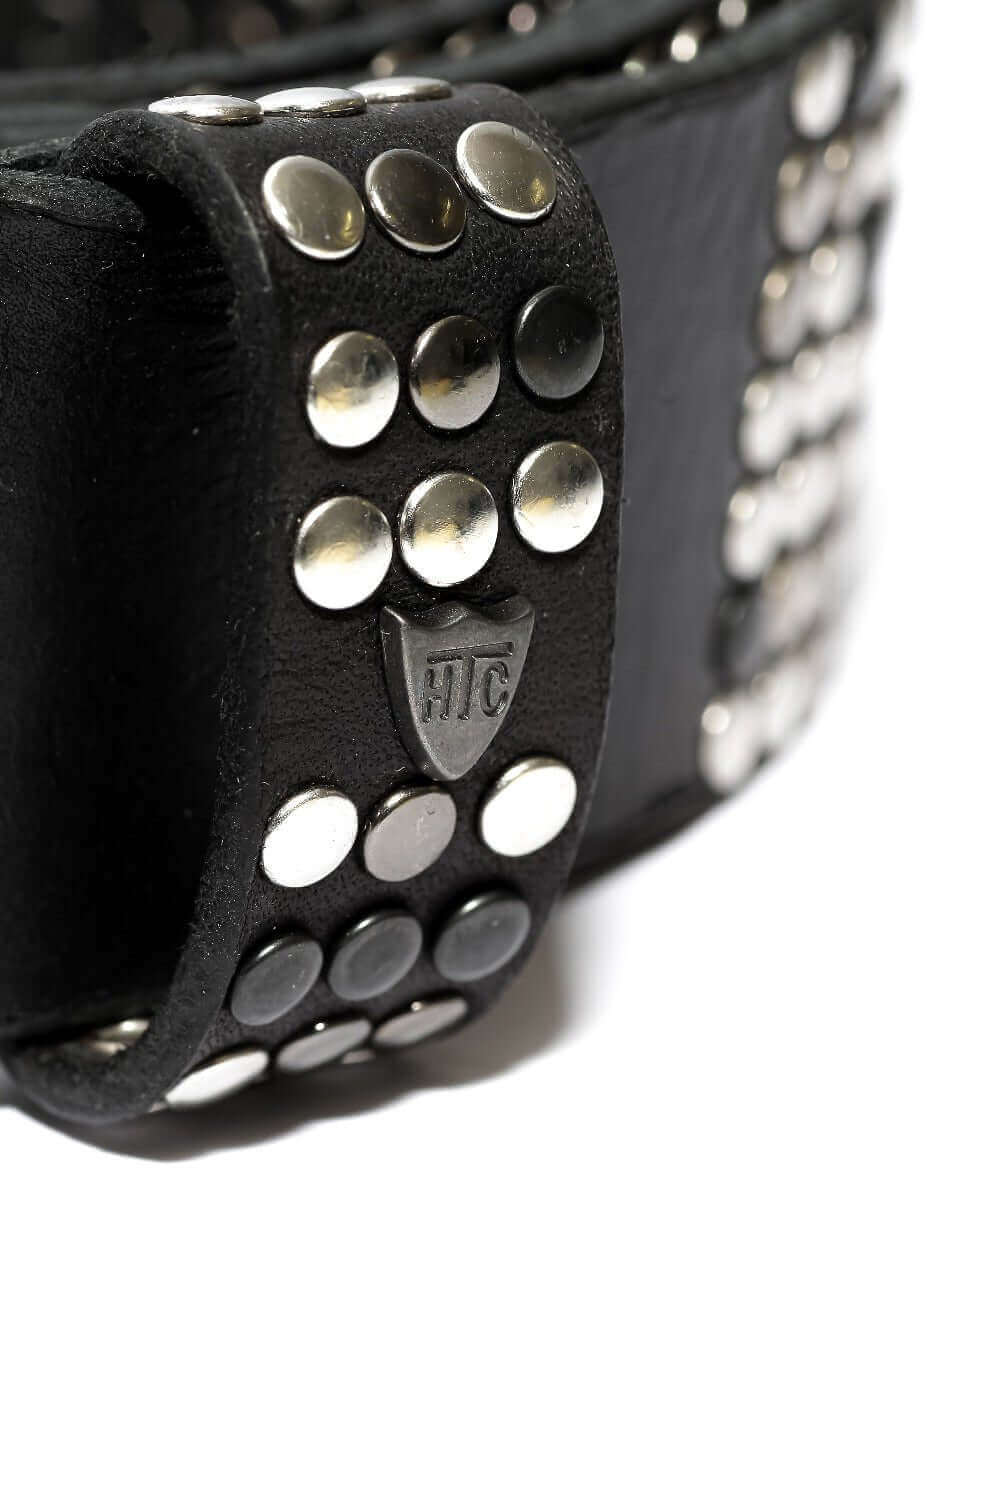 10.000 STUDS COLOR BELT Leather belt with mixed studs, brass buckle, studded zamac belt loop with HTC logo rivet. Made in Italy. HTC LOS ANGELES